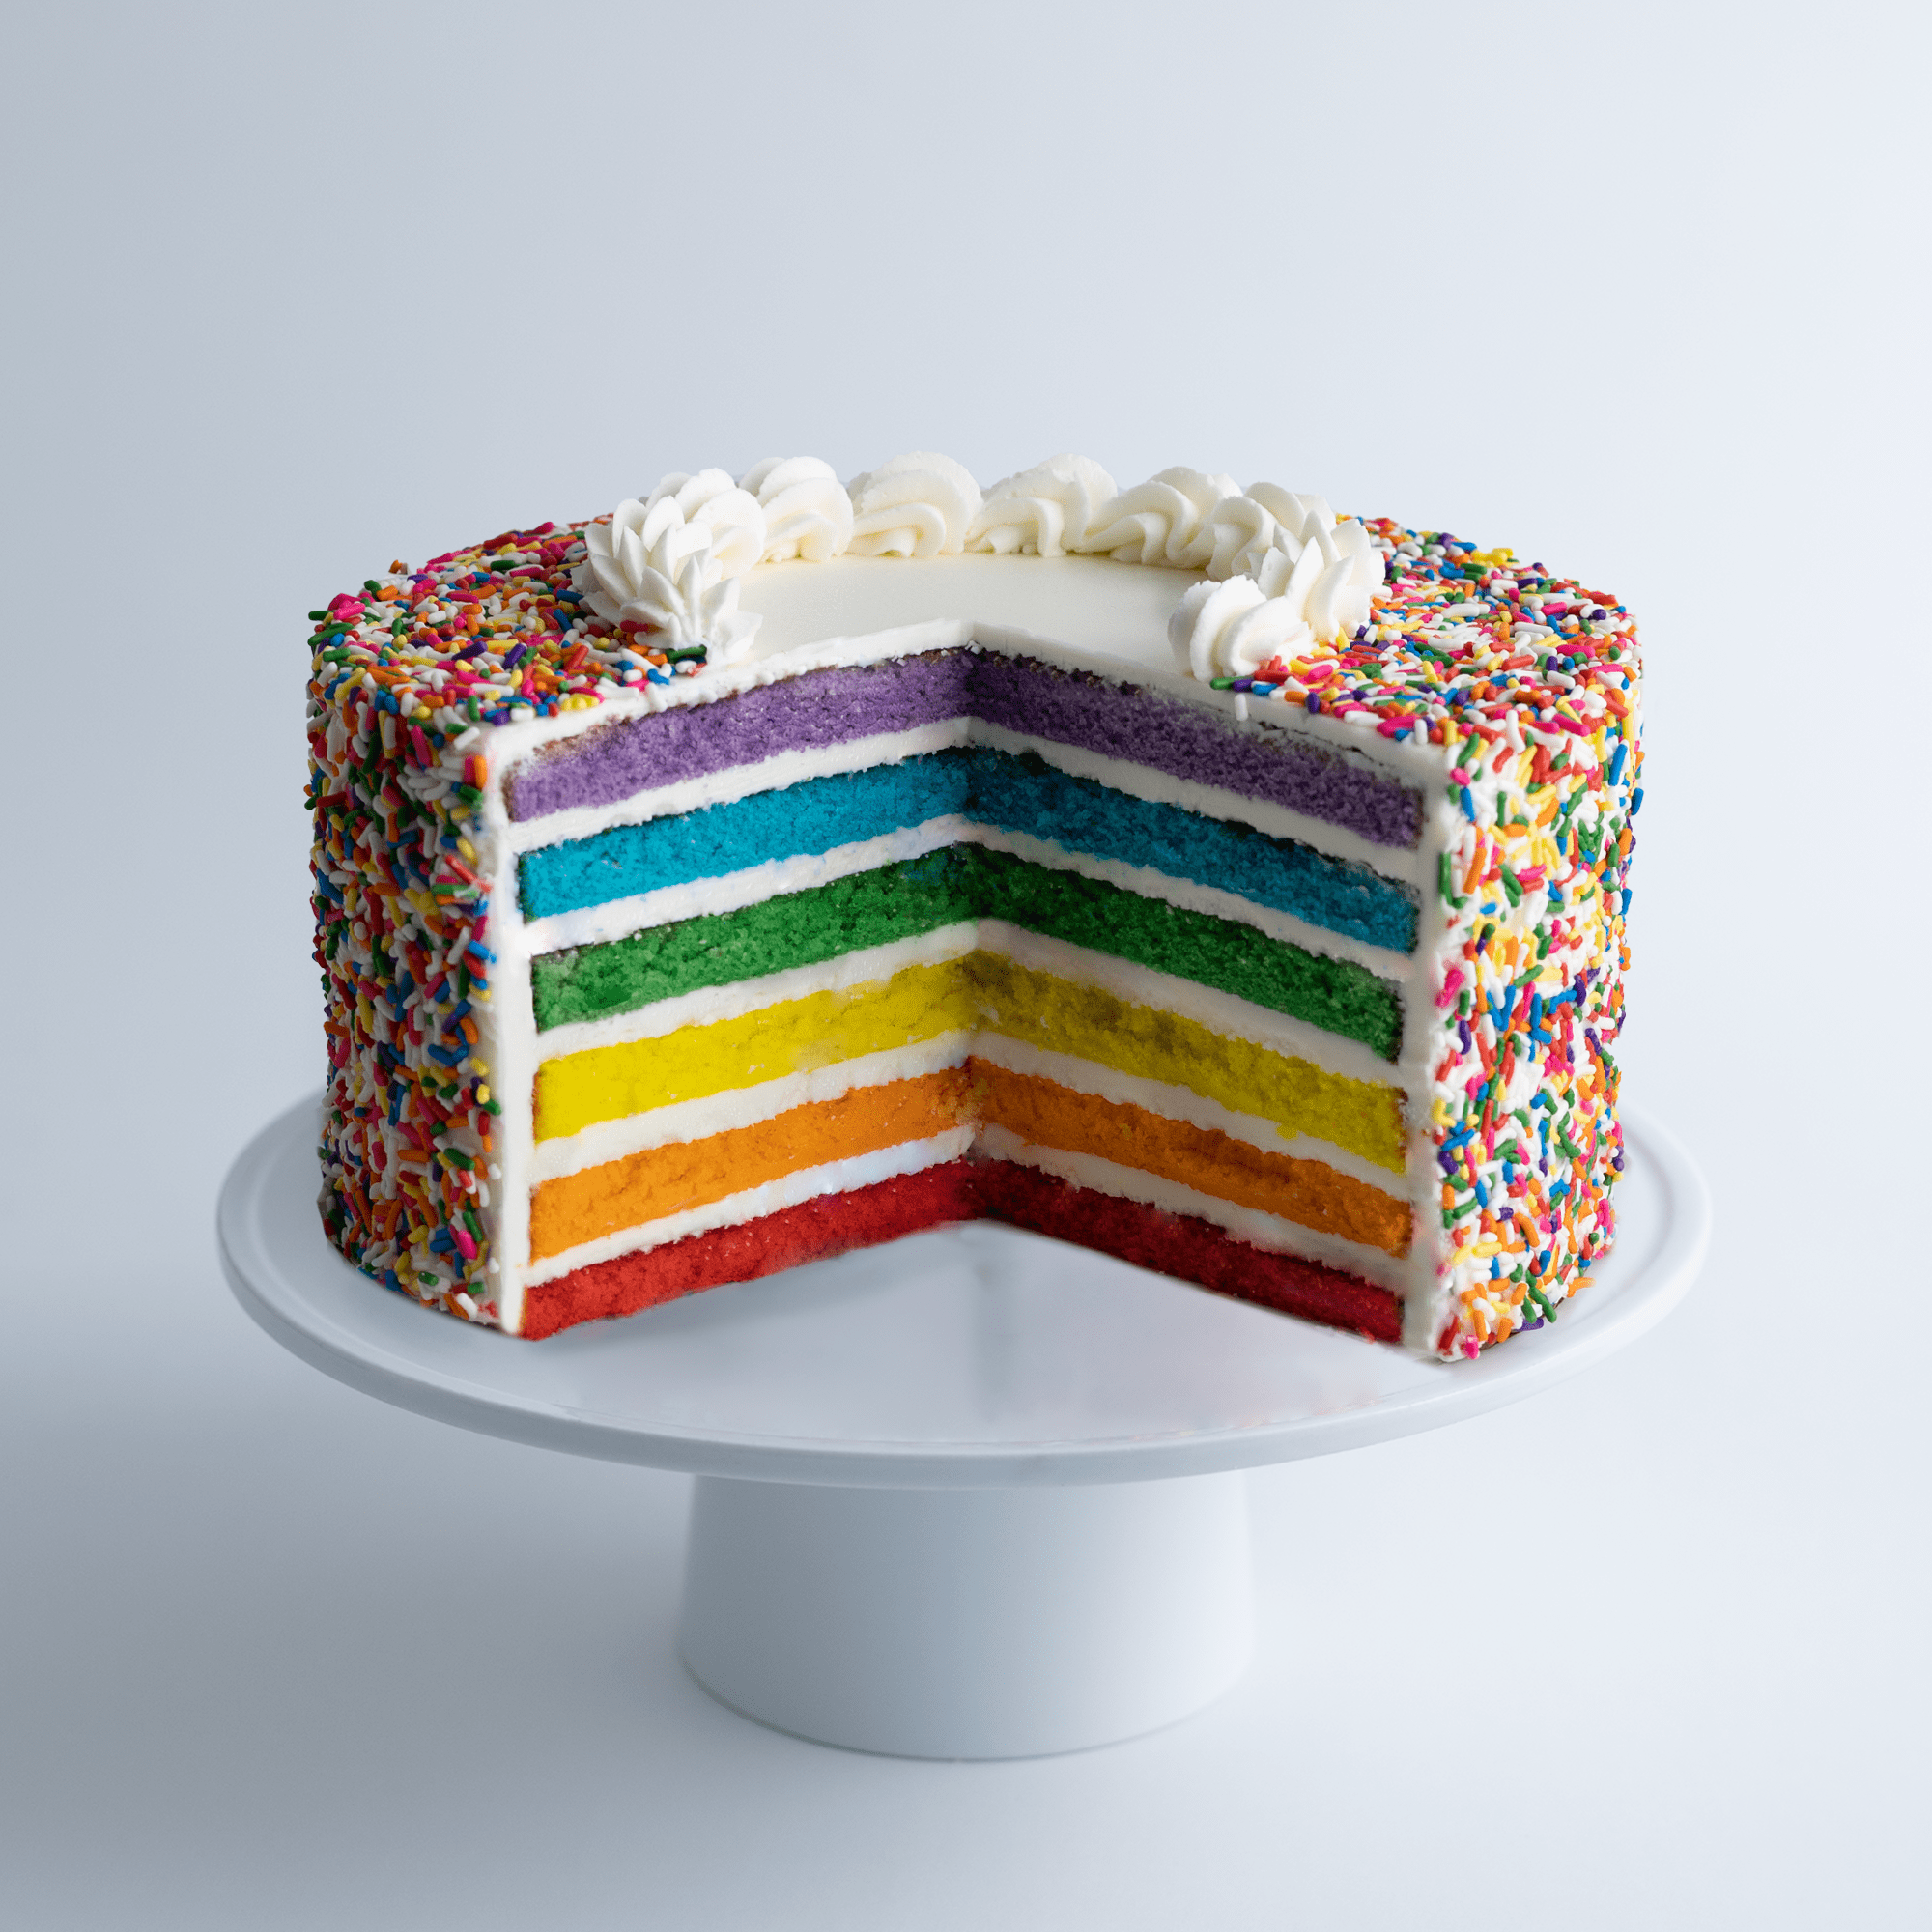 Carlo's Bakery Cake Boss Vanilla Rainbow Cake, Large 10” Size - Serves 18 to 24 - Birthday Cakes and Treats for Delivery - Baked Fresh Daily, Delivered Frozen in Dry Ice - Walmart.com